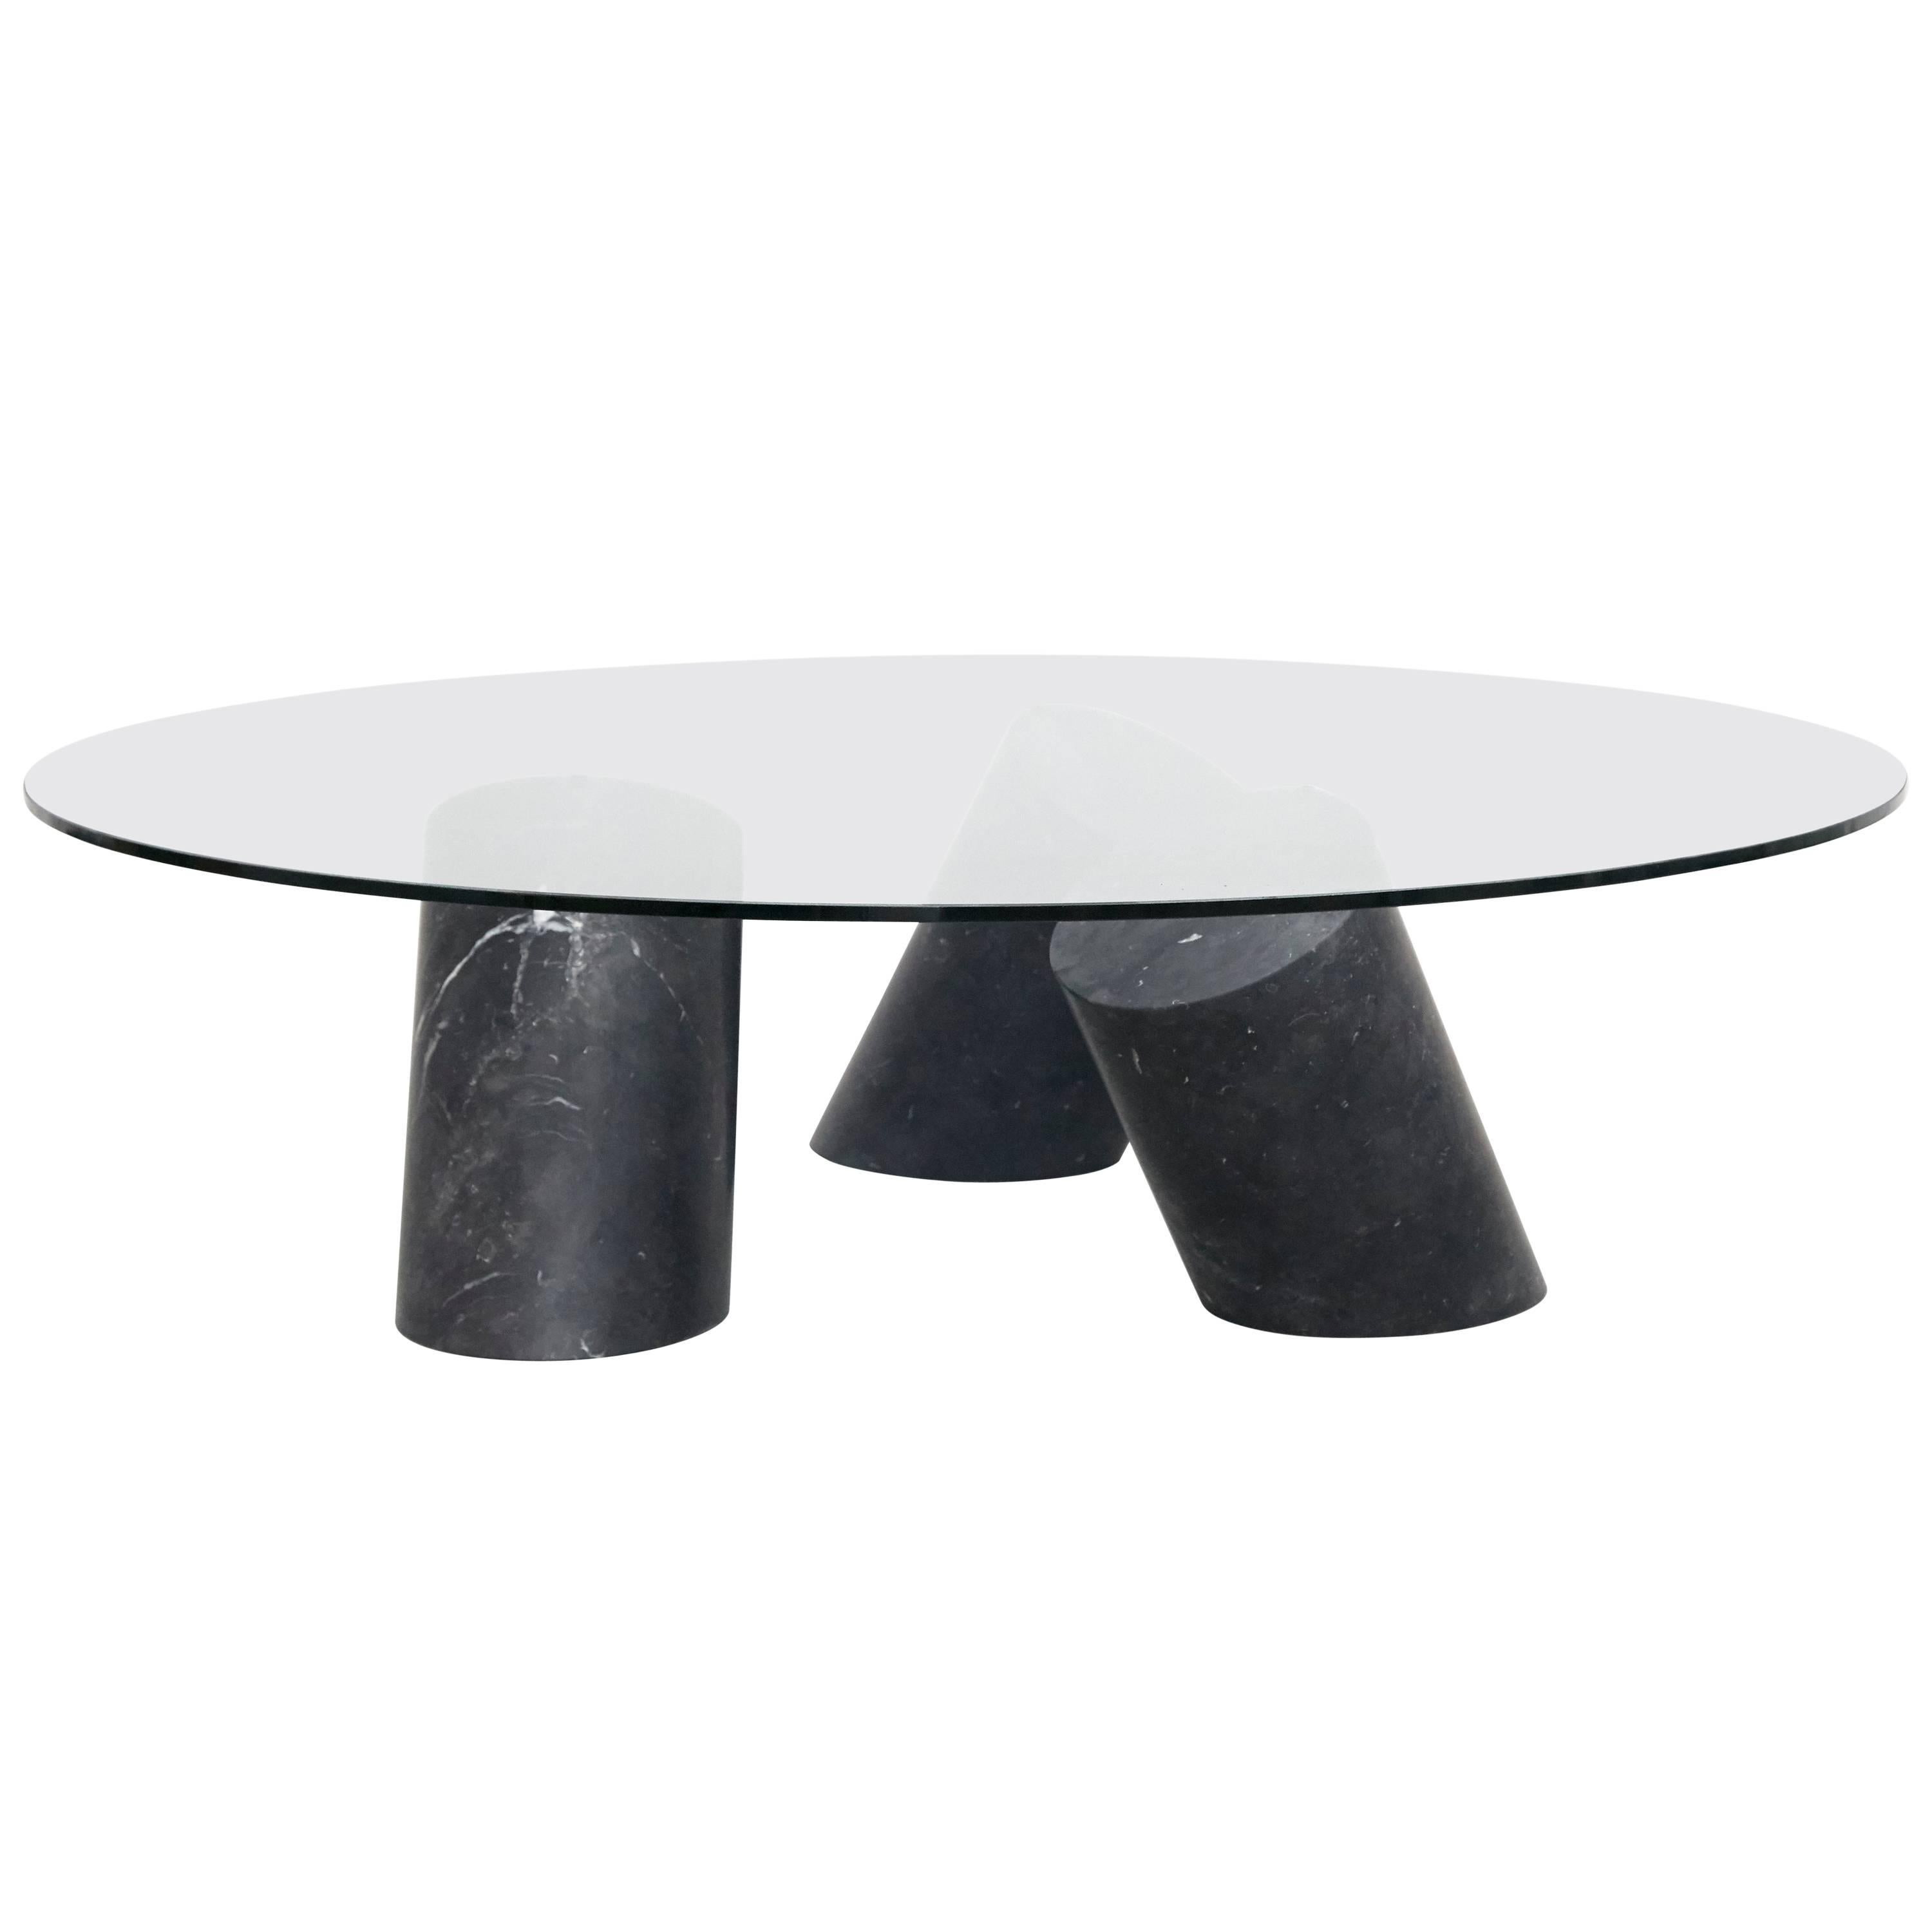 Goula Figuera Carnac Table